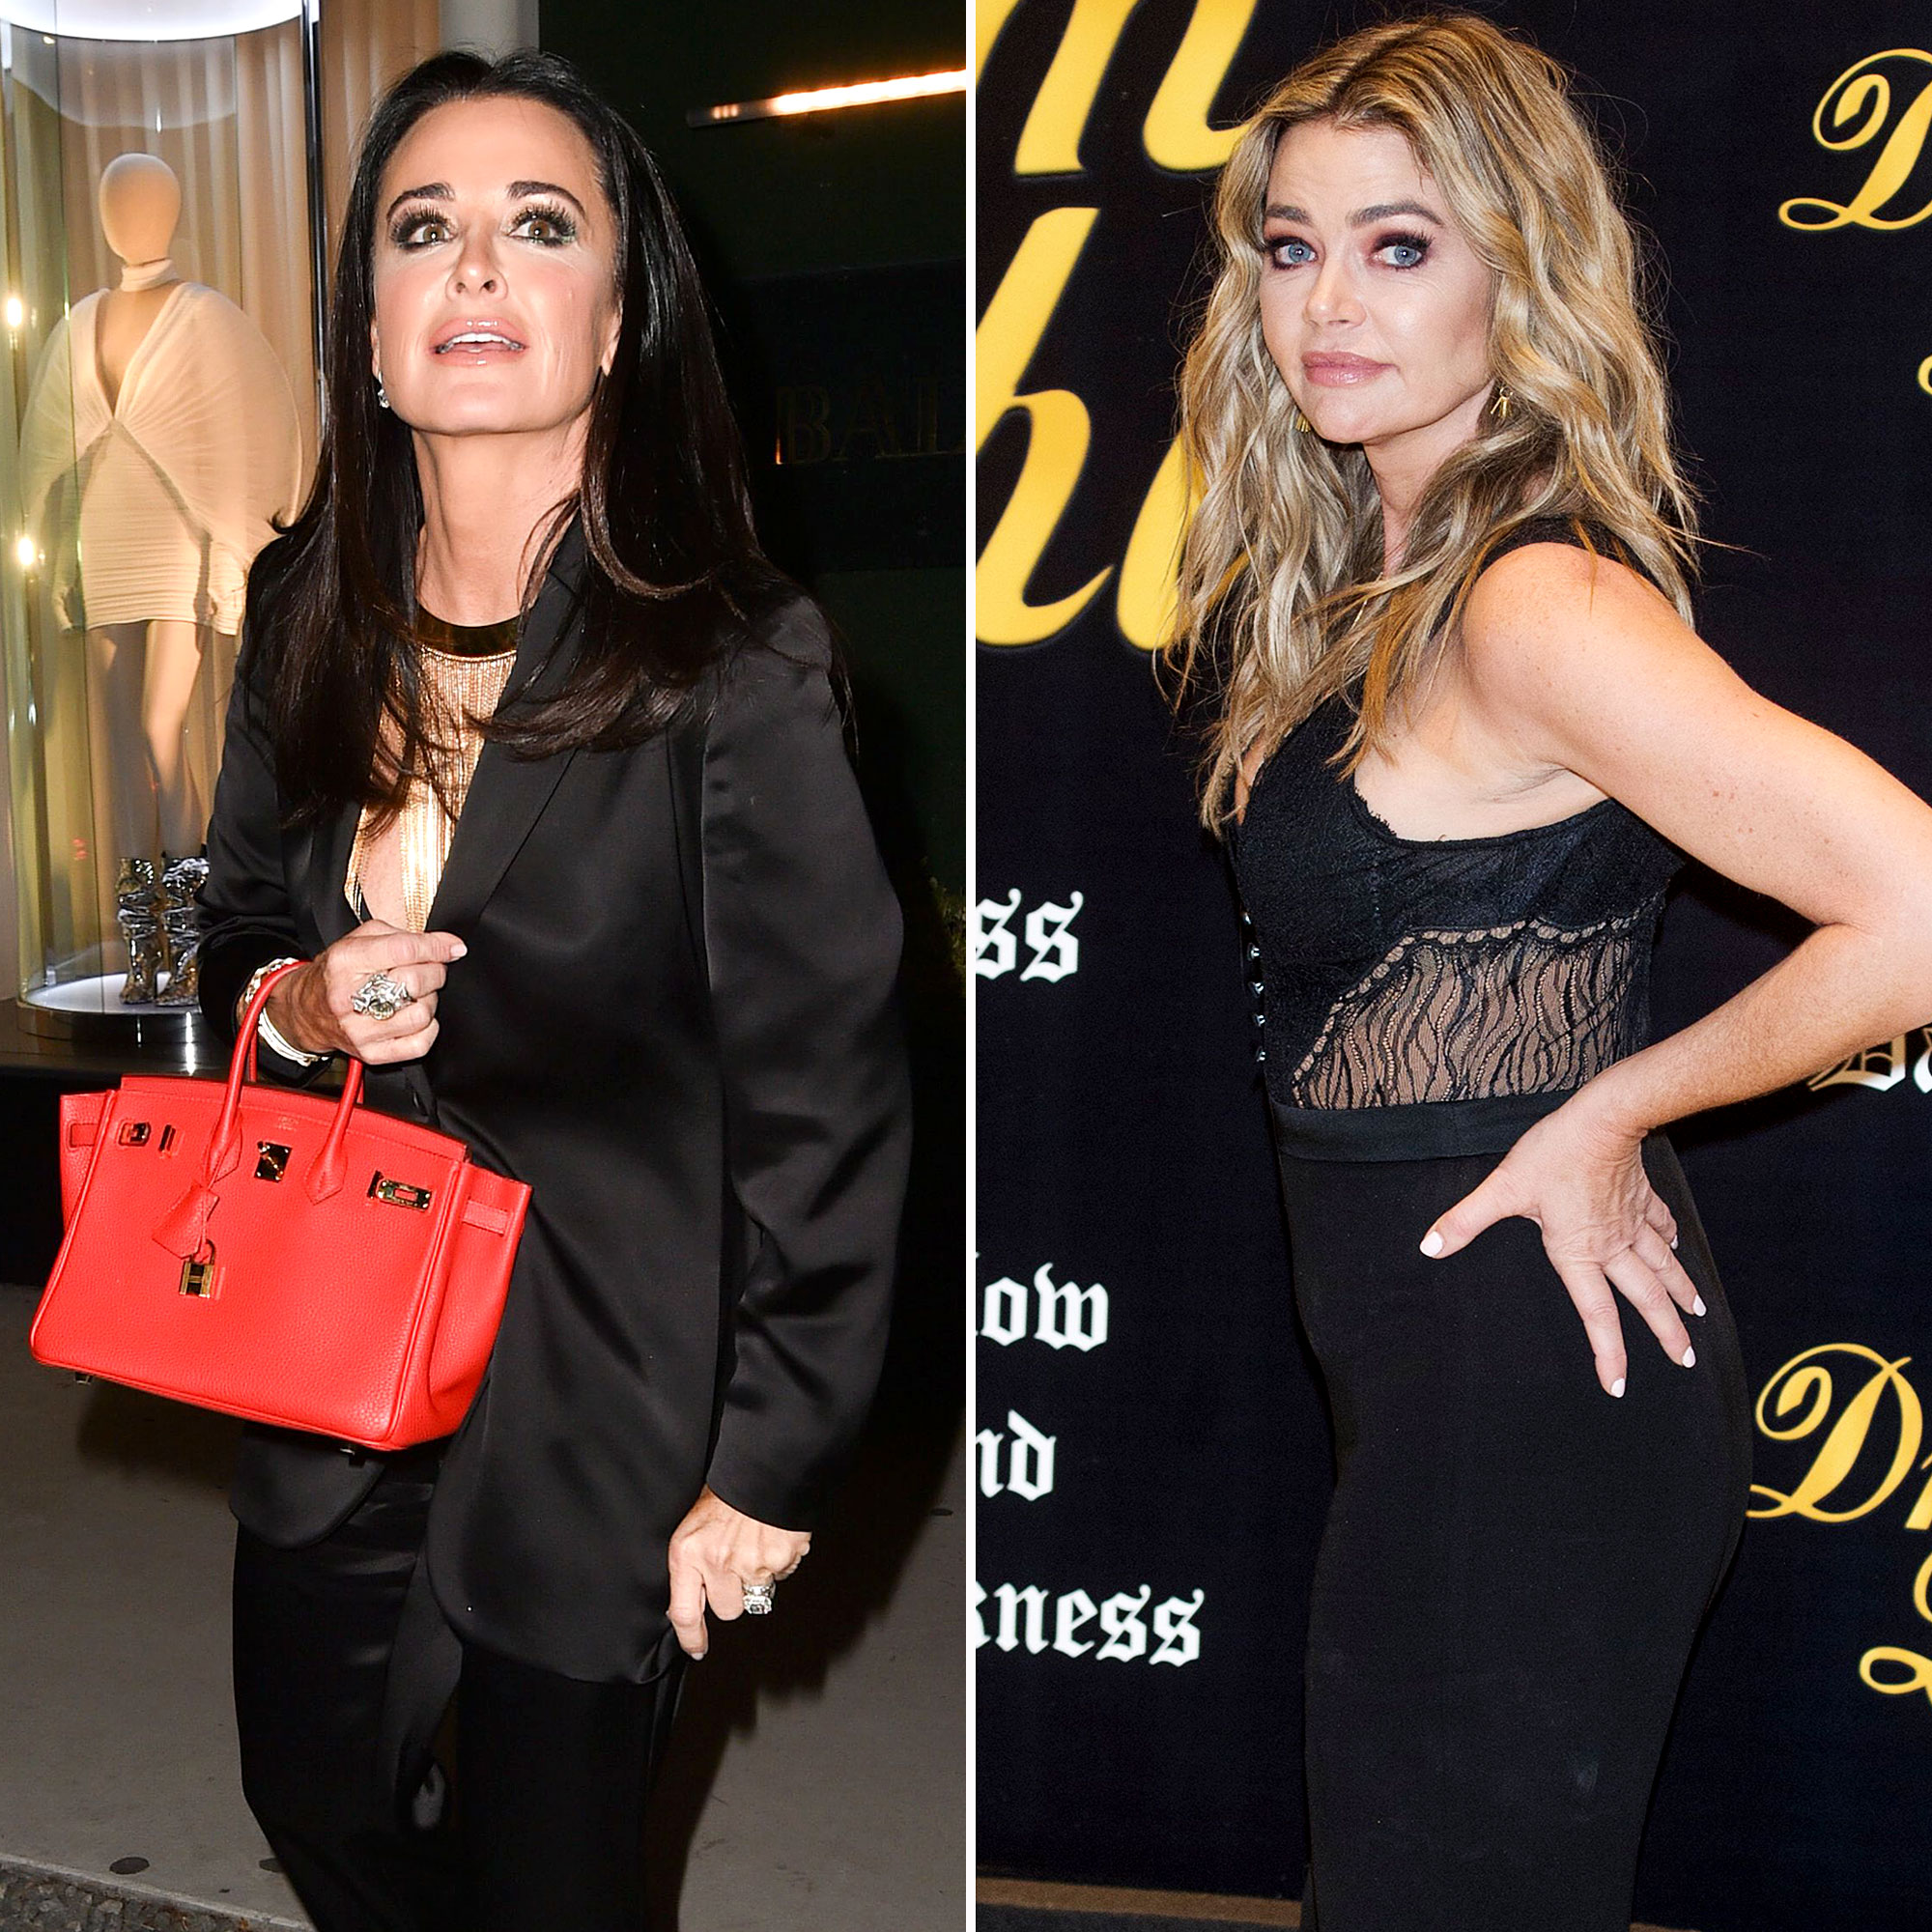 Kyle Richards 'Took Issue' With Denise Richards Not Filming 'RHOBH